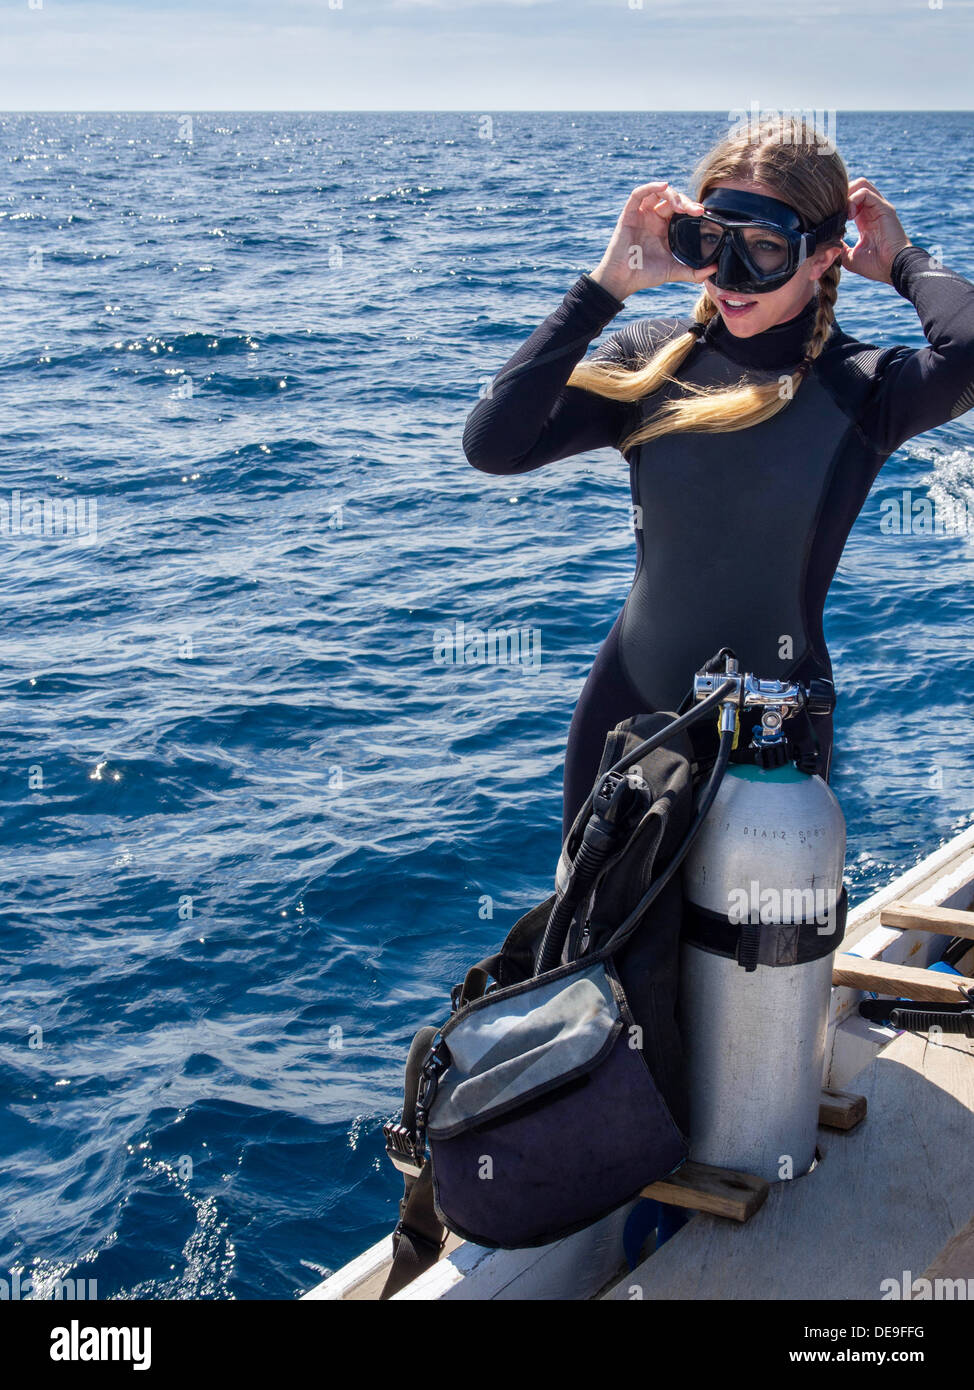 Caucasian woman on a boat in the ocean adjusts her goggles in preparation for scuba diving. Stock Photo